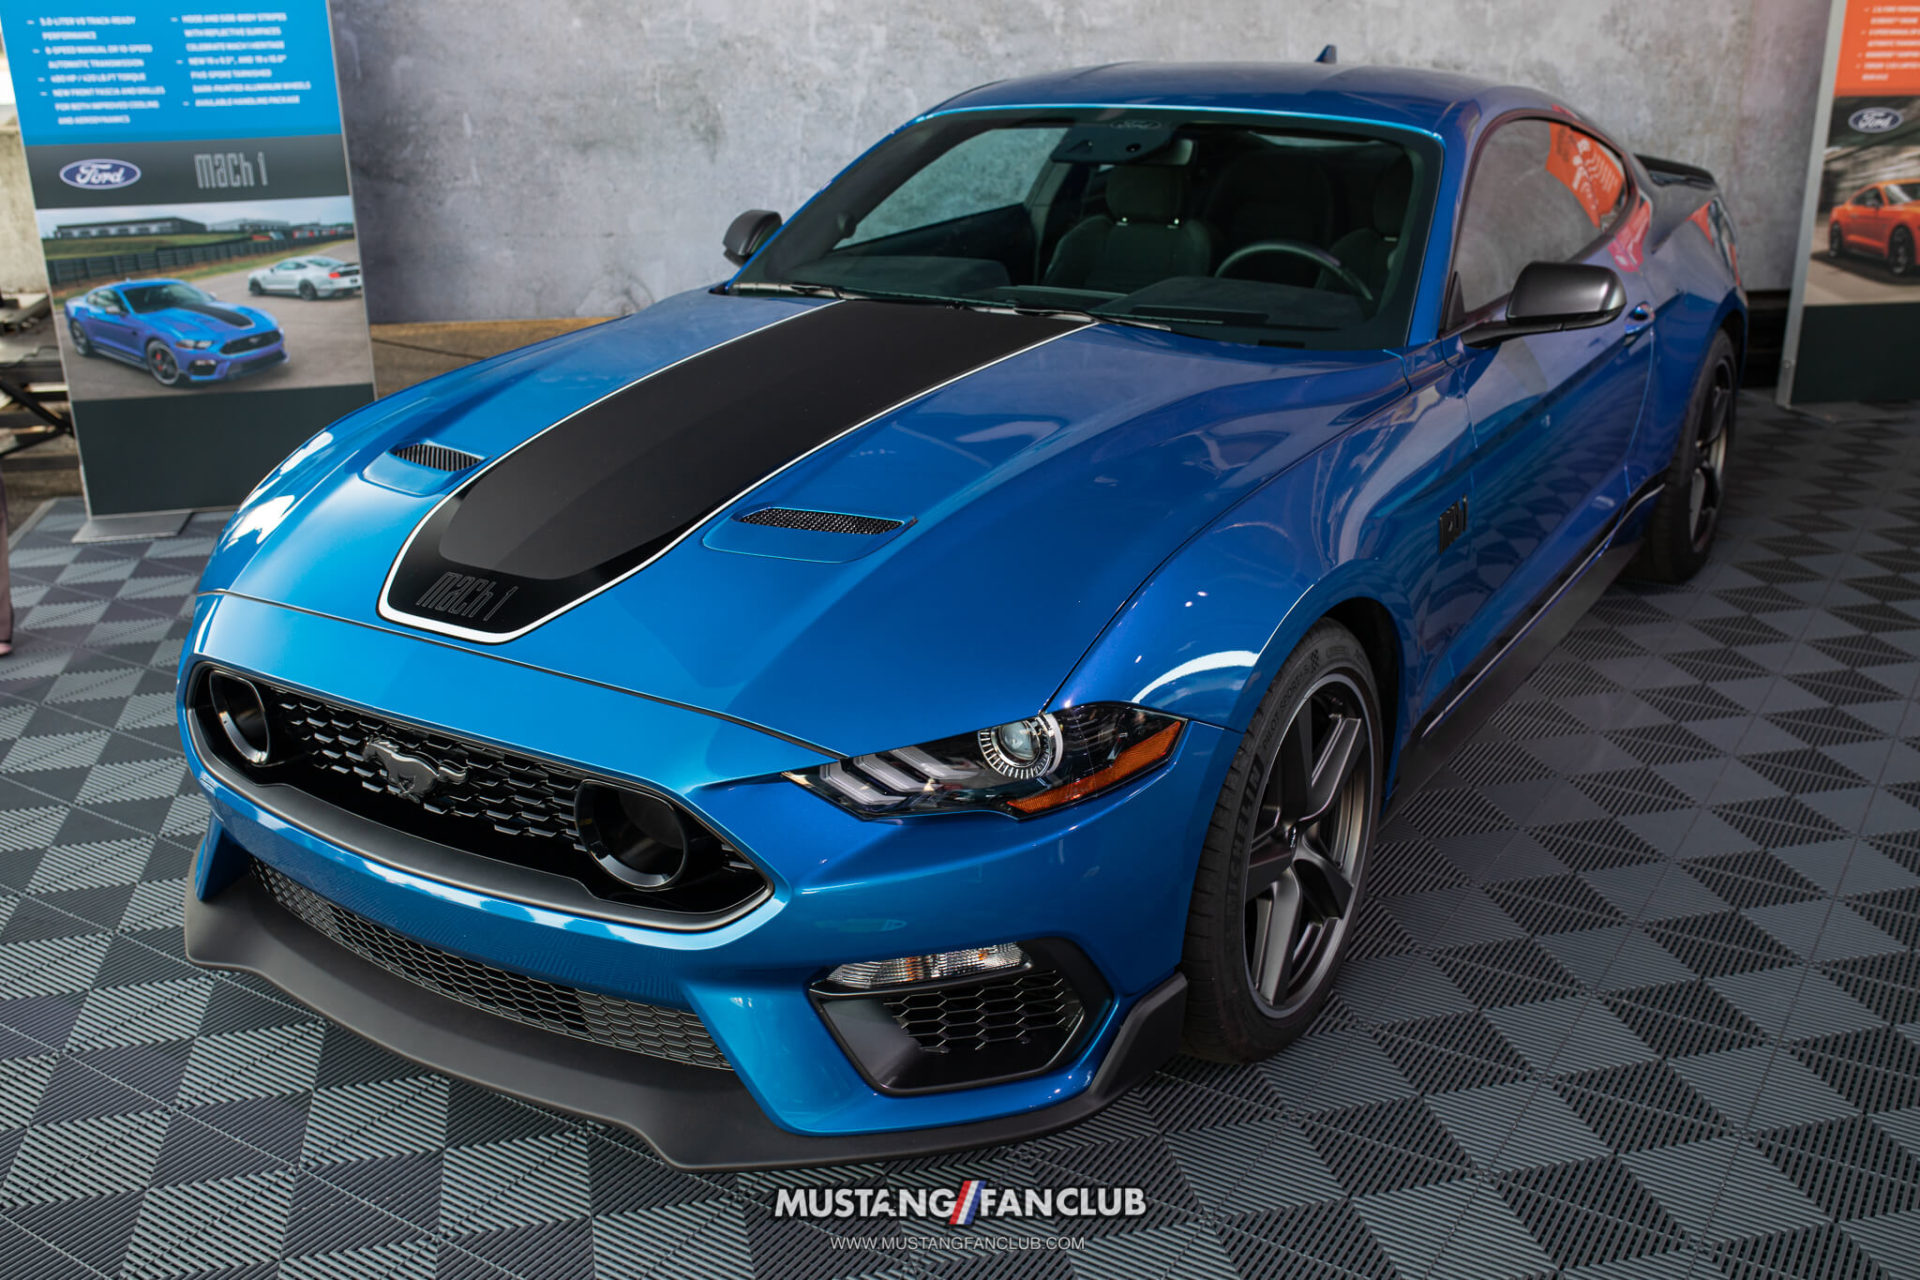 2021 Ford Mustang Mach 1 Velocity Blue Metallic with Black Stripes Greenlig...